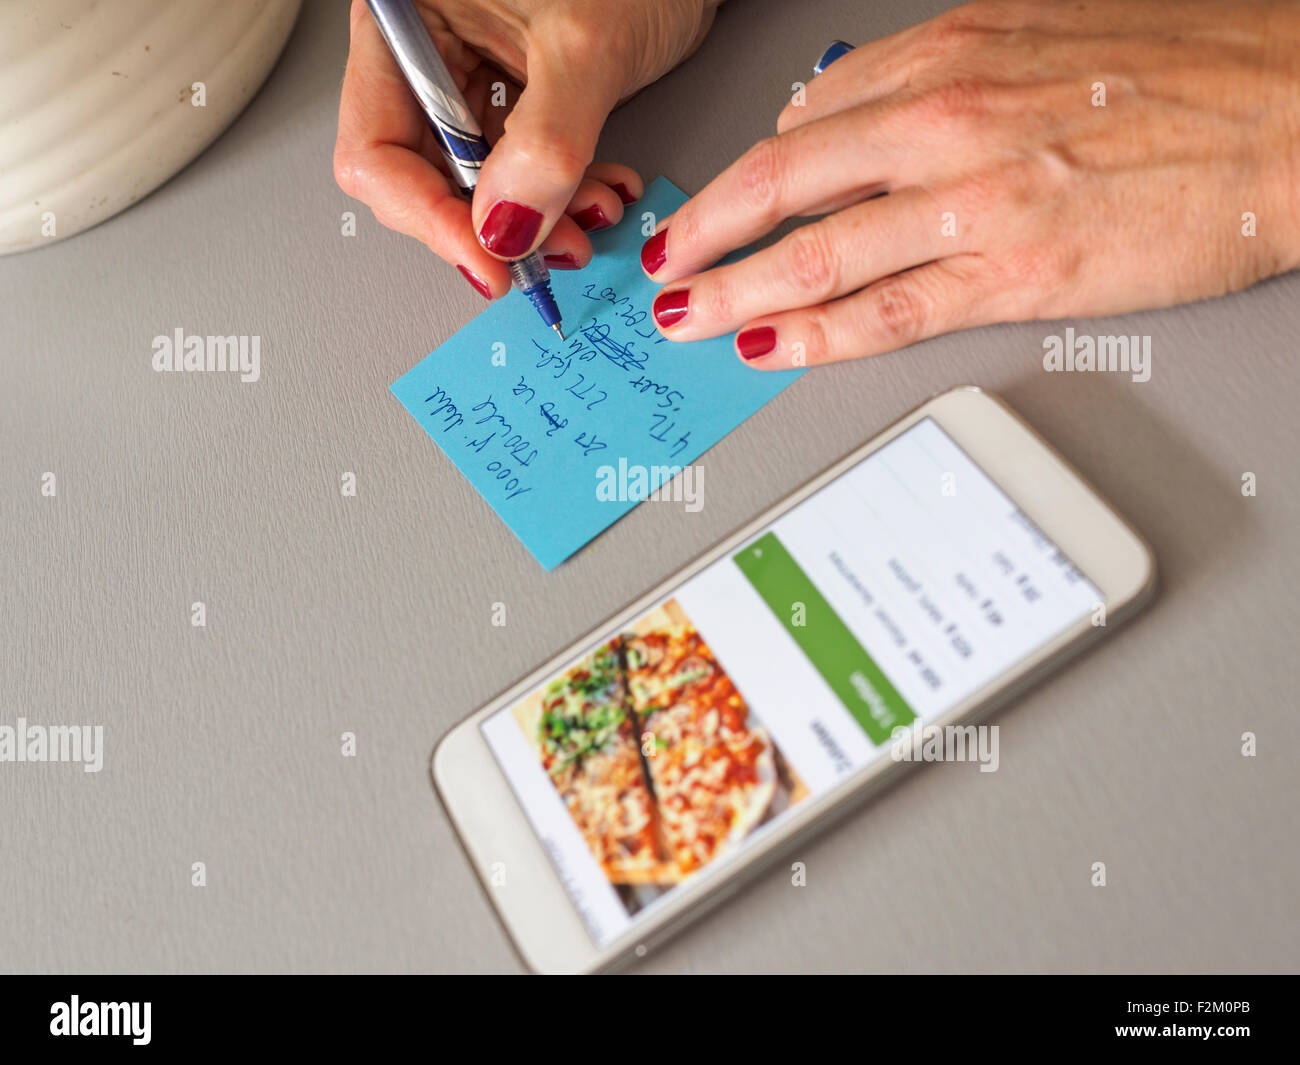 Woman writing down recipe on a note Stock Photo